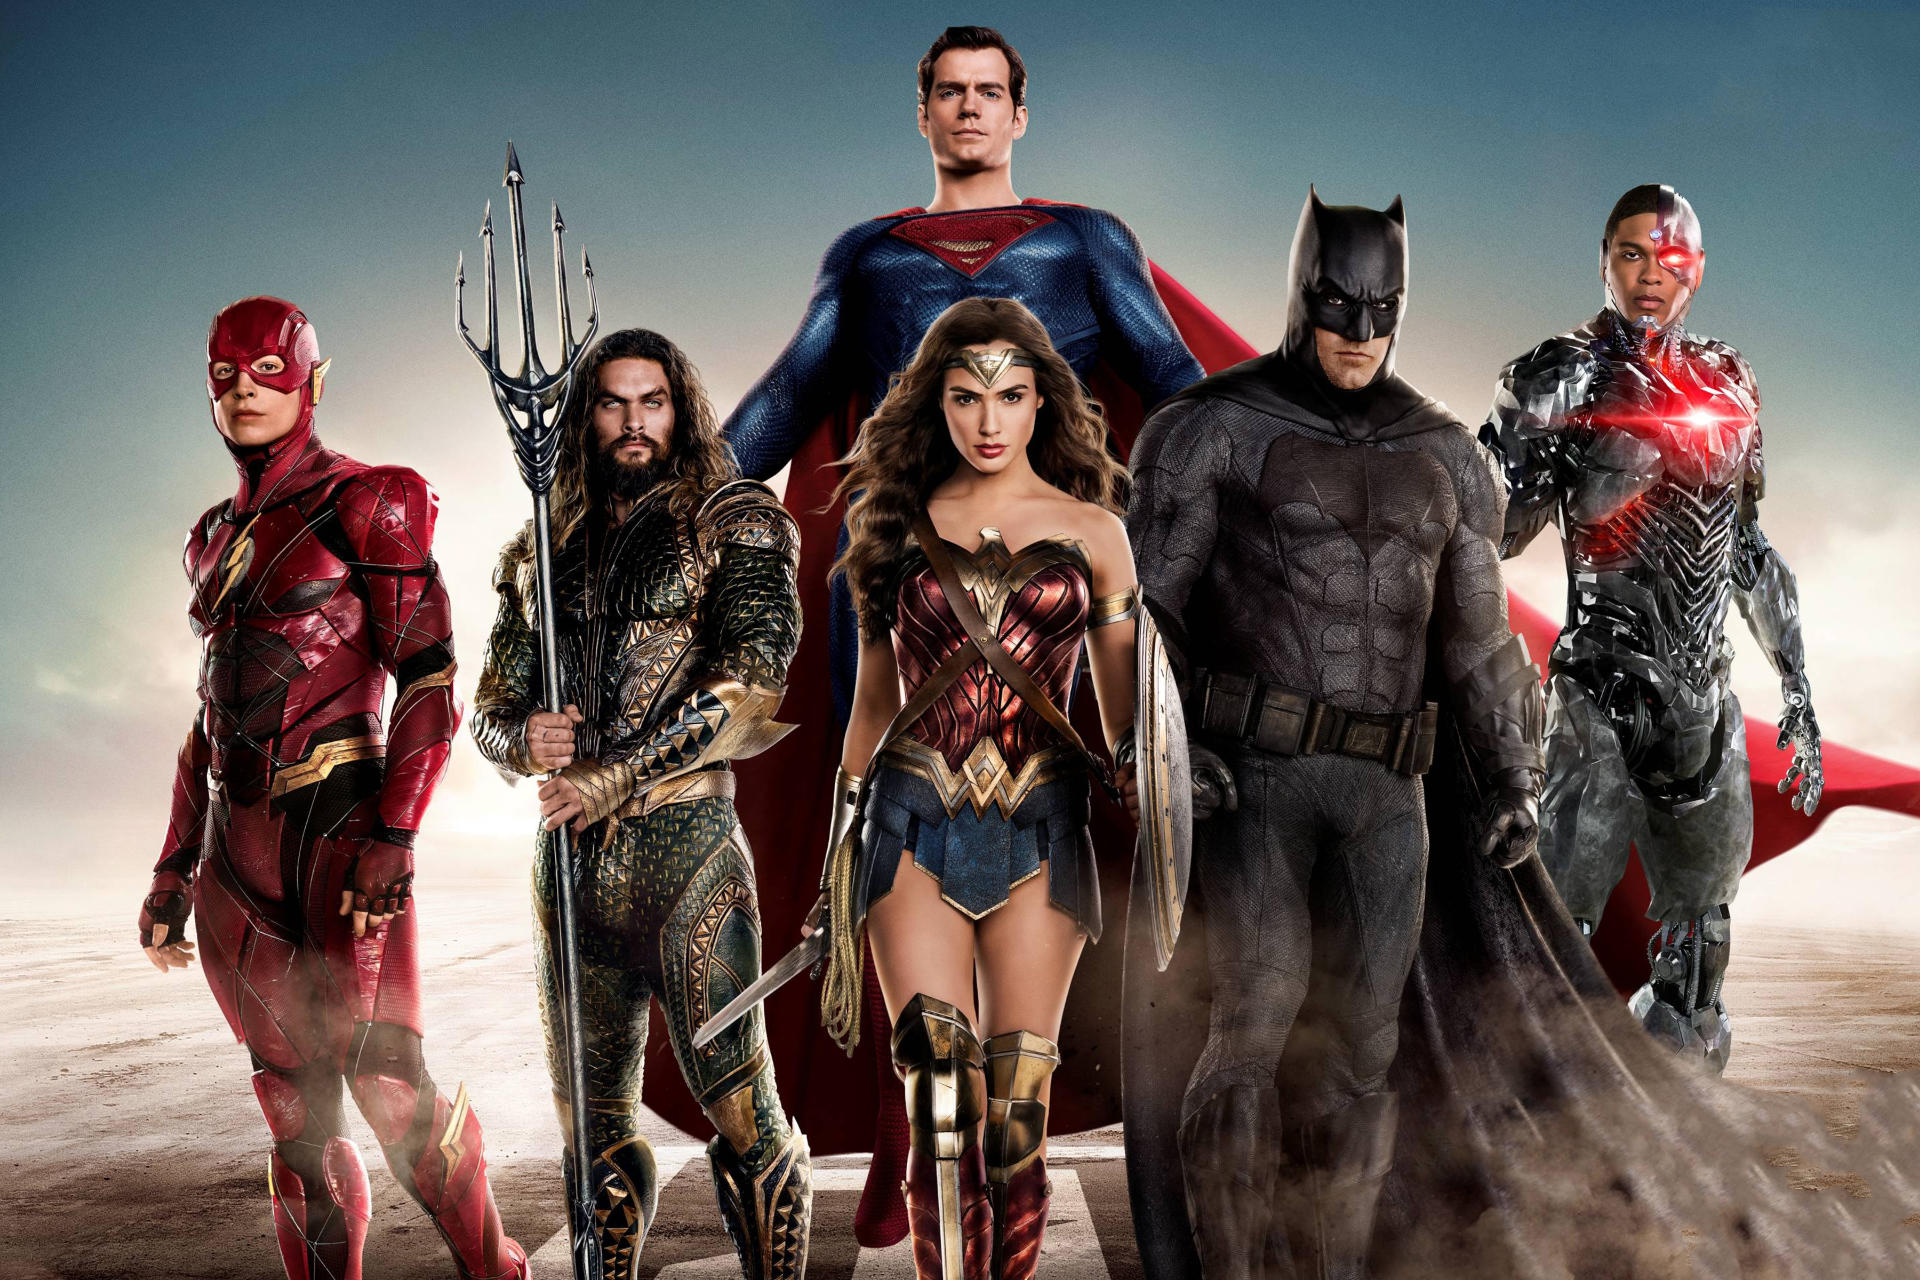 Justice League Snyder Cut Described as a “Street That Leads to Nowhere” By DC Films Executive